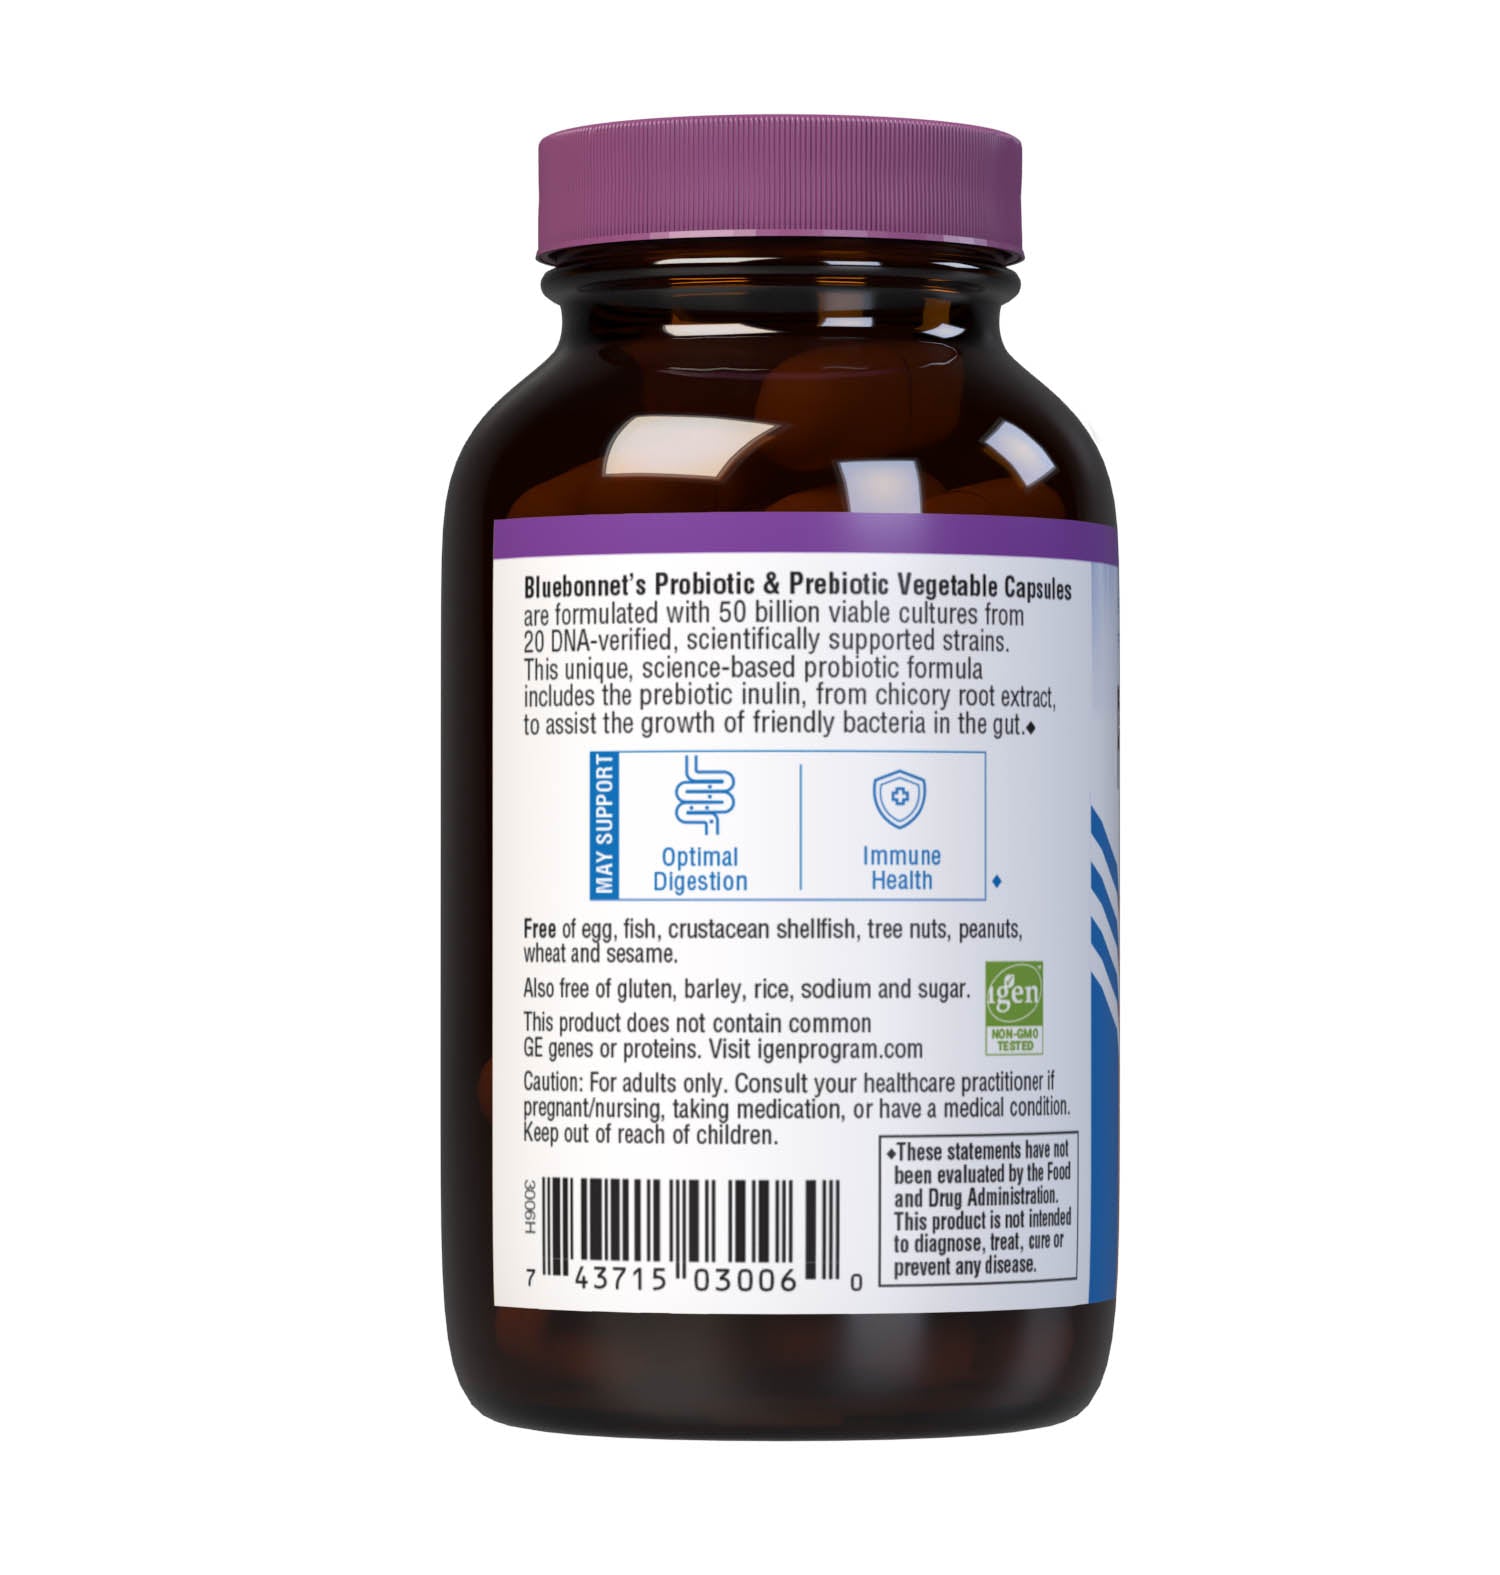 Bluebonnet’s Probiotic & Prebiotic 30 Vegetable Capsules are formulated with 50 billion viable cultures from 20 DNA-verified, scientifically supported strains. This unique, science-based probiotic formula includes the prebiotic inulin from chicory root extract, to assist the growth of friendly bacterium in the gut. Description panel. #size_30 count